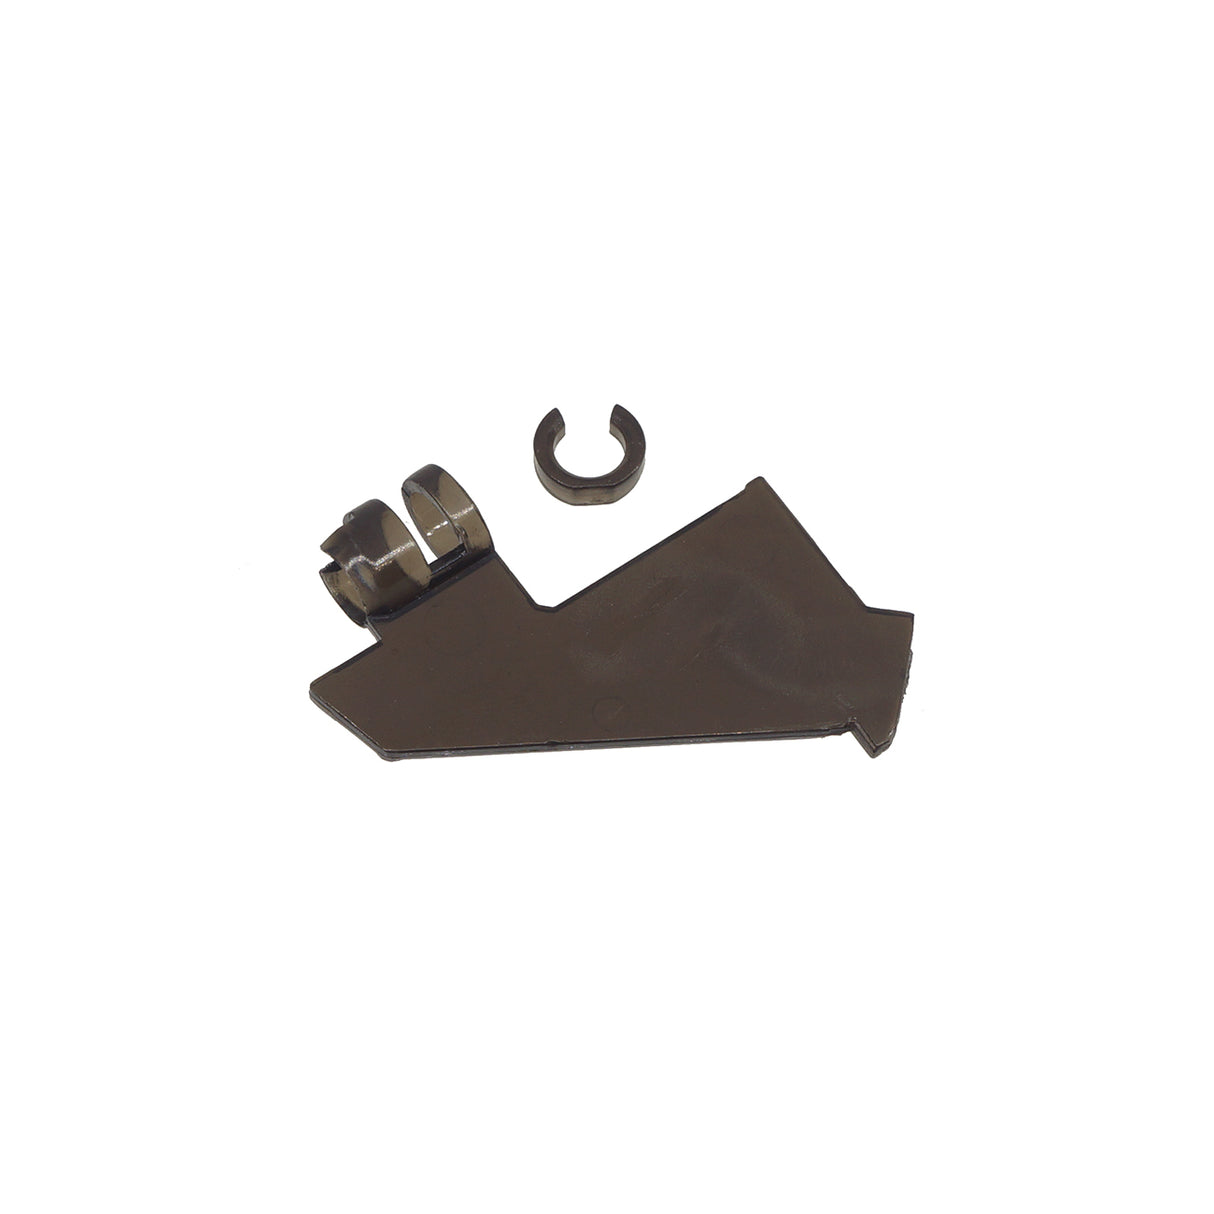 WELL Replacement Loading Plate for MB4409 Series ( WELL-AC060 )